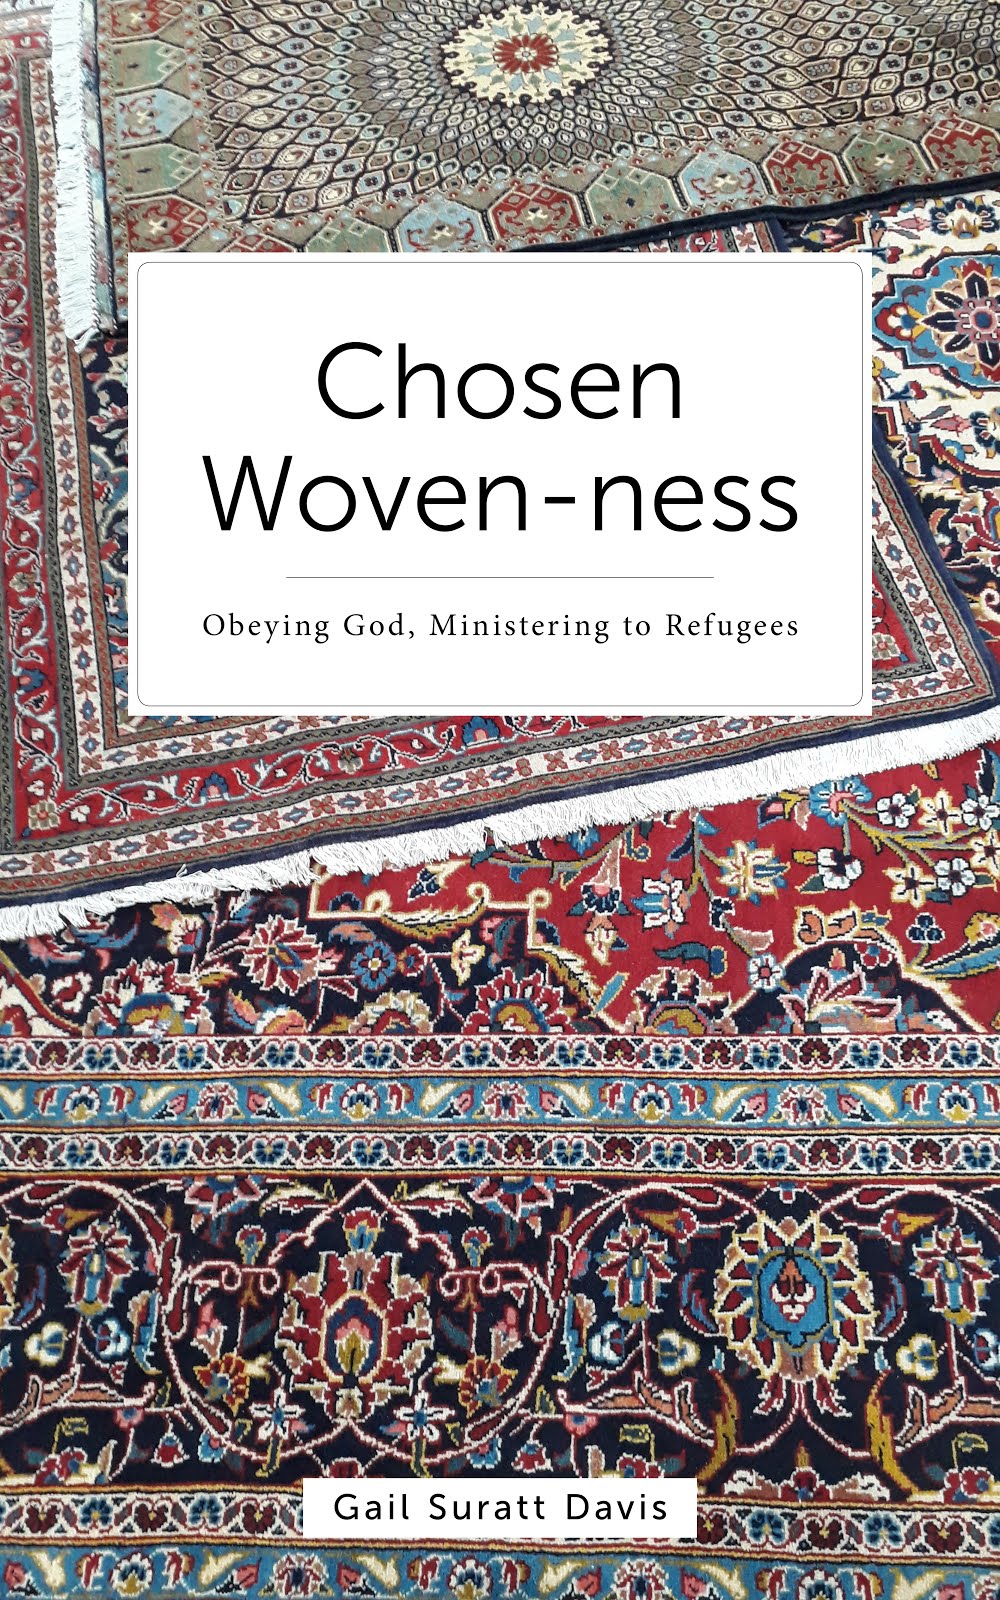 Chosen Woven-ness: Obeying God, Ministering to Refugees